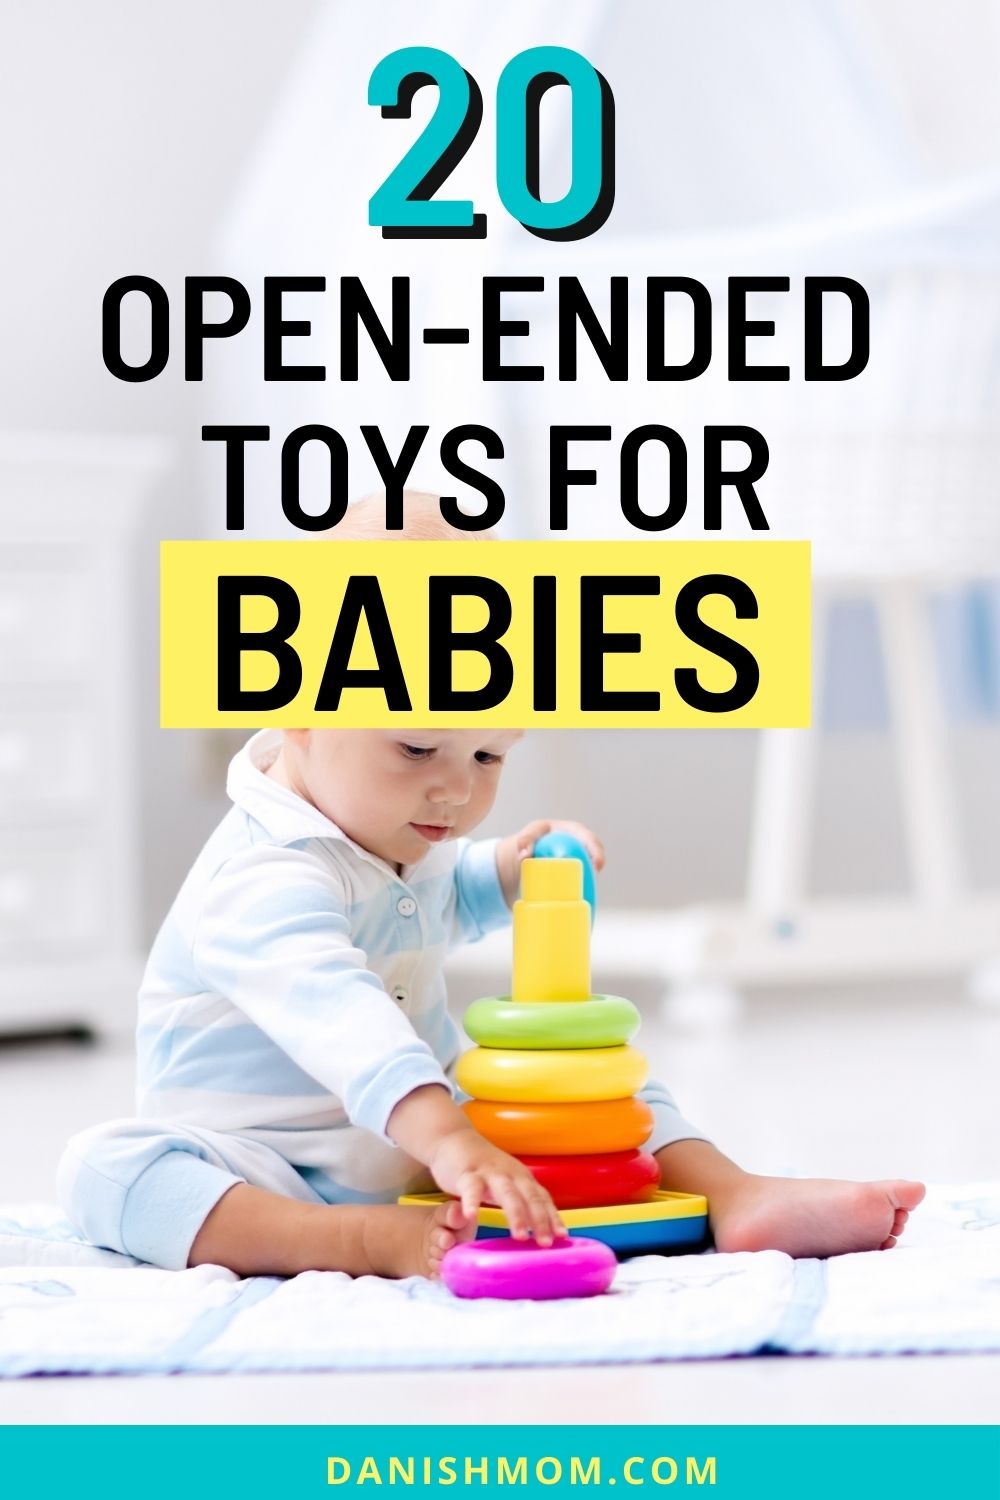 Your baby will have fun with these 20 budget friendly baby toys at home. These are simple open ended toys for babies that can activate your little one and you can call it a parenting win.